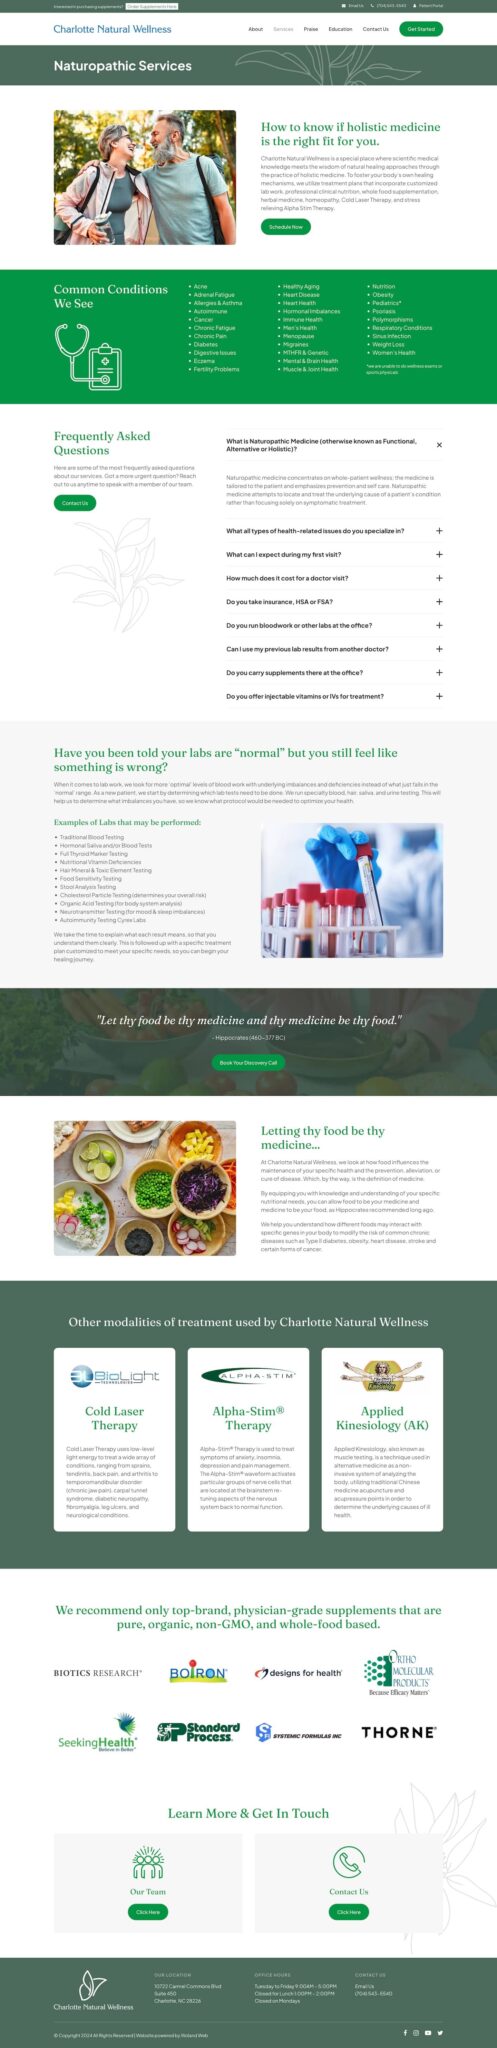 Charlotte Natural Wellness website naturopathic services page